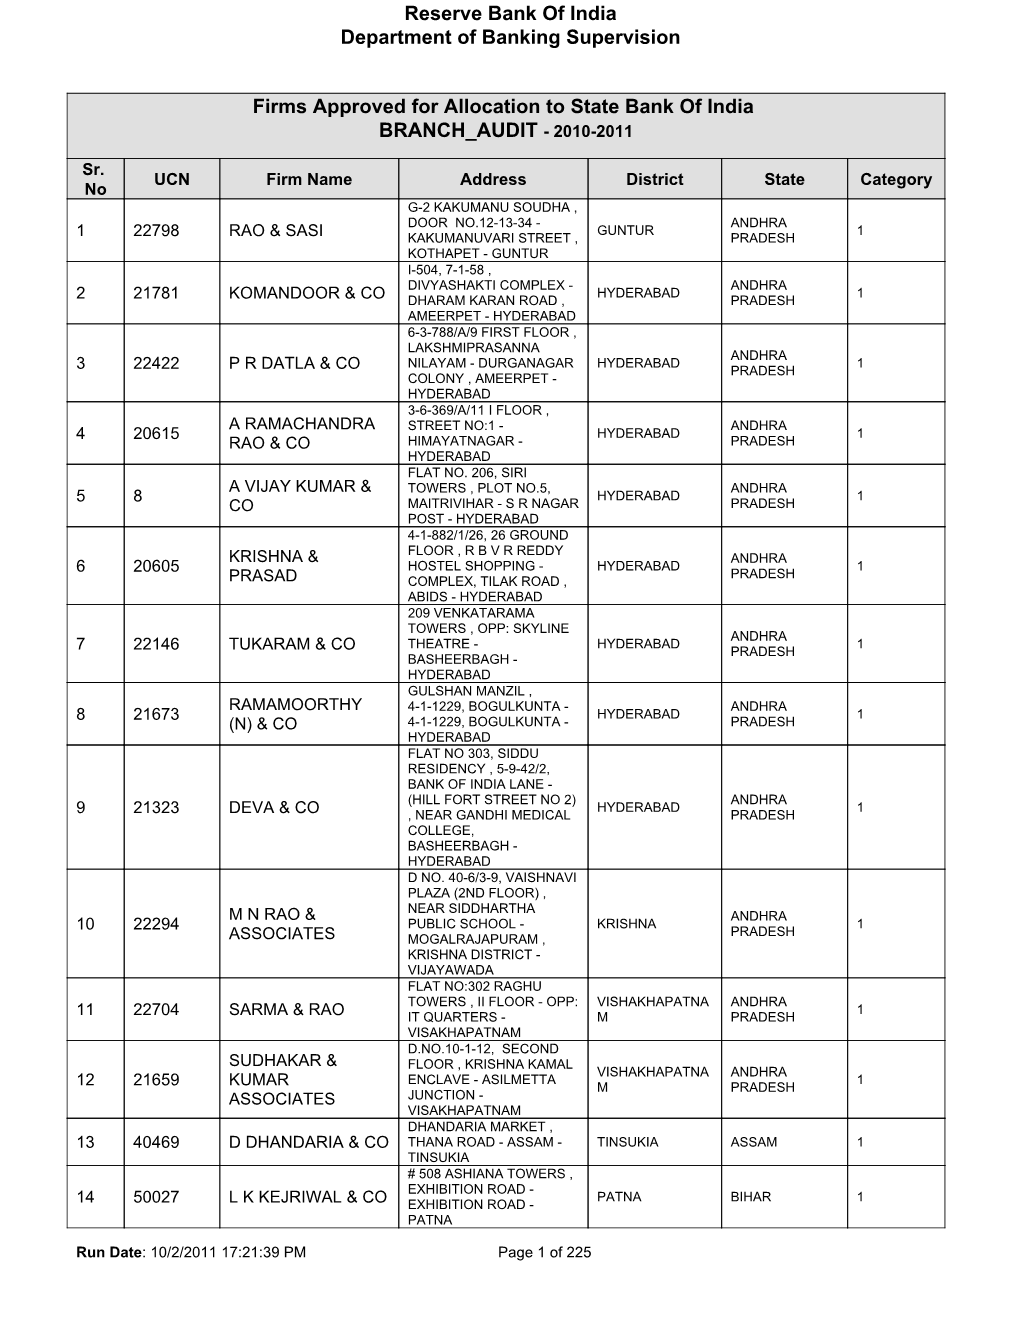 Firms Approved for Allocation to State Bank of India BRANCH AUDIT - 2010-2011